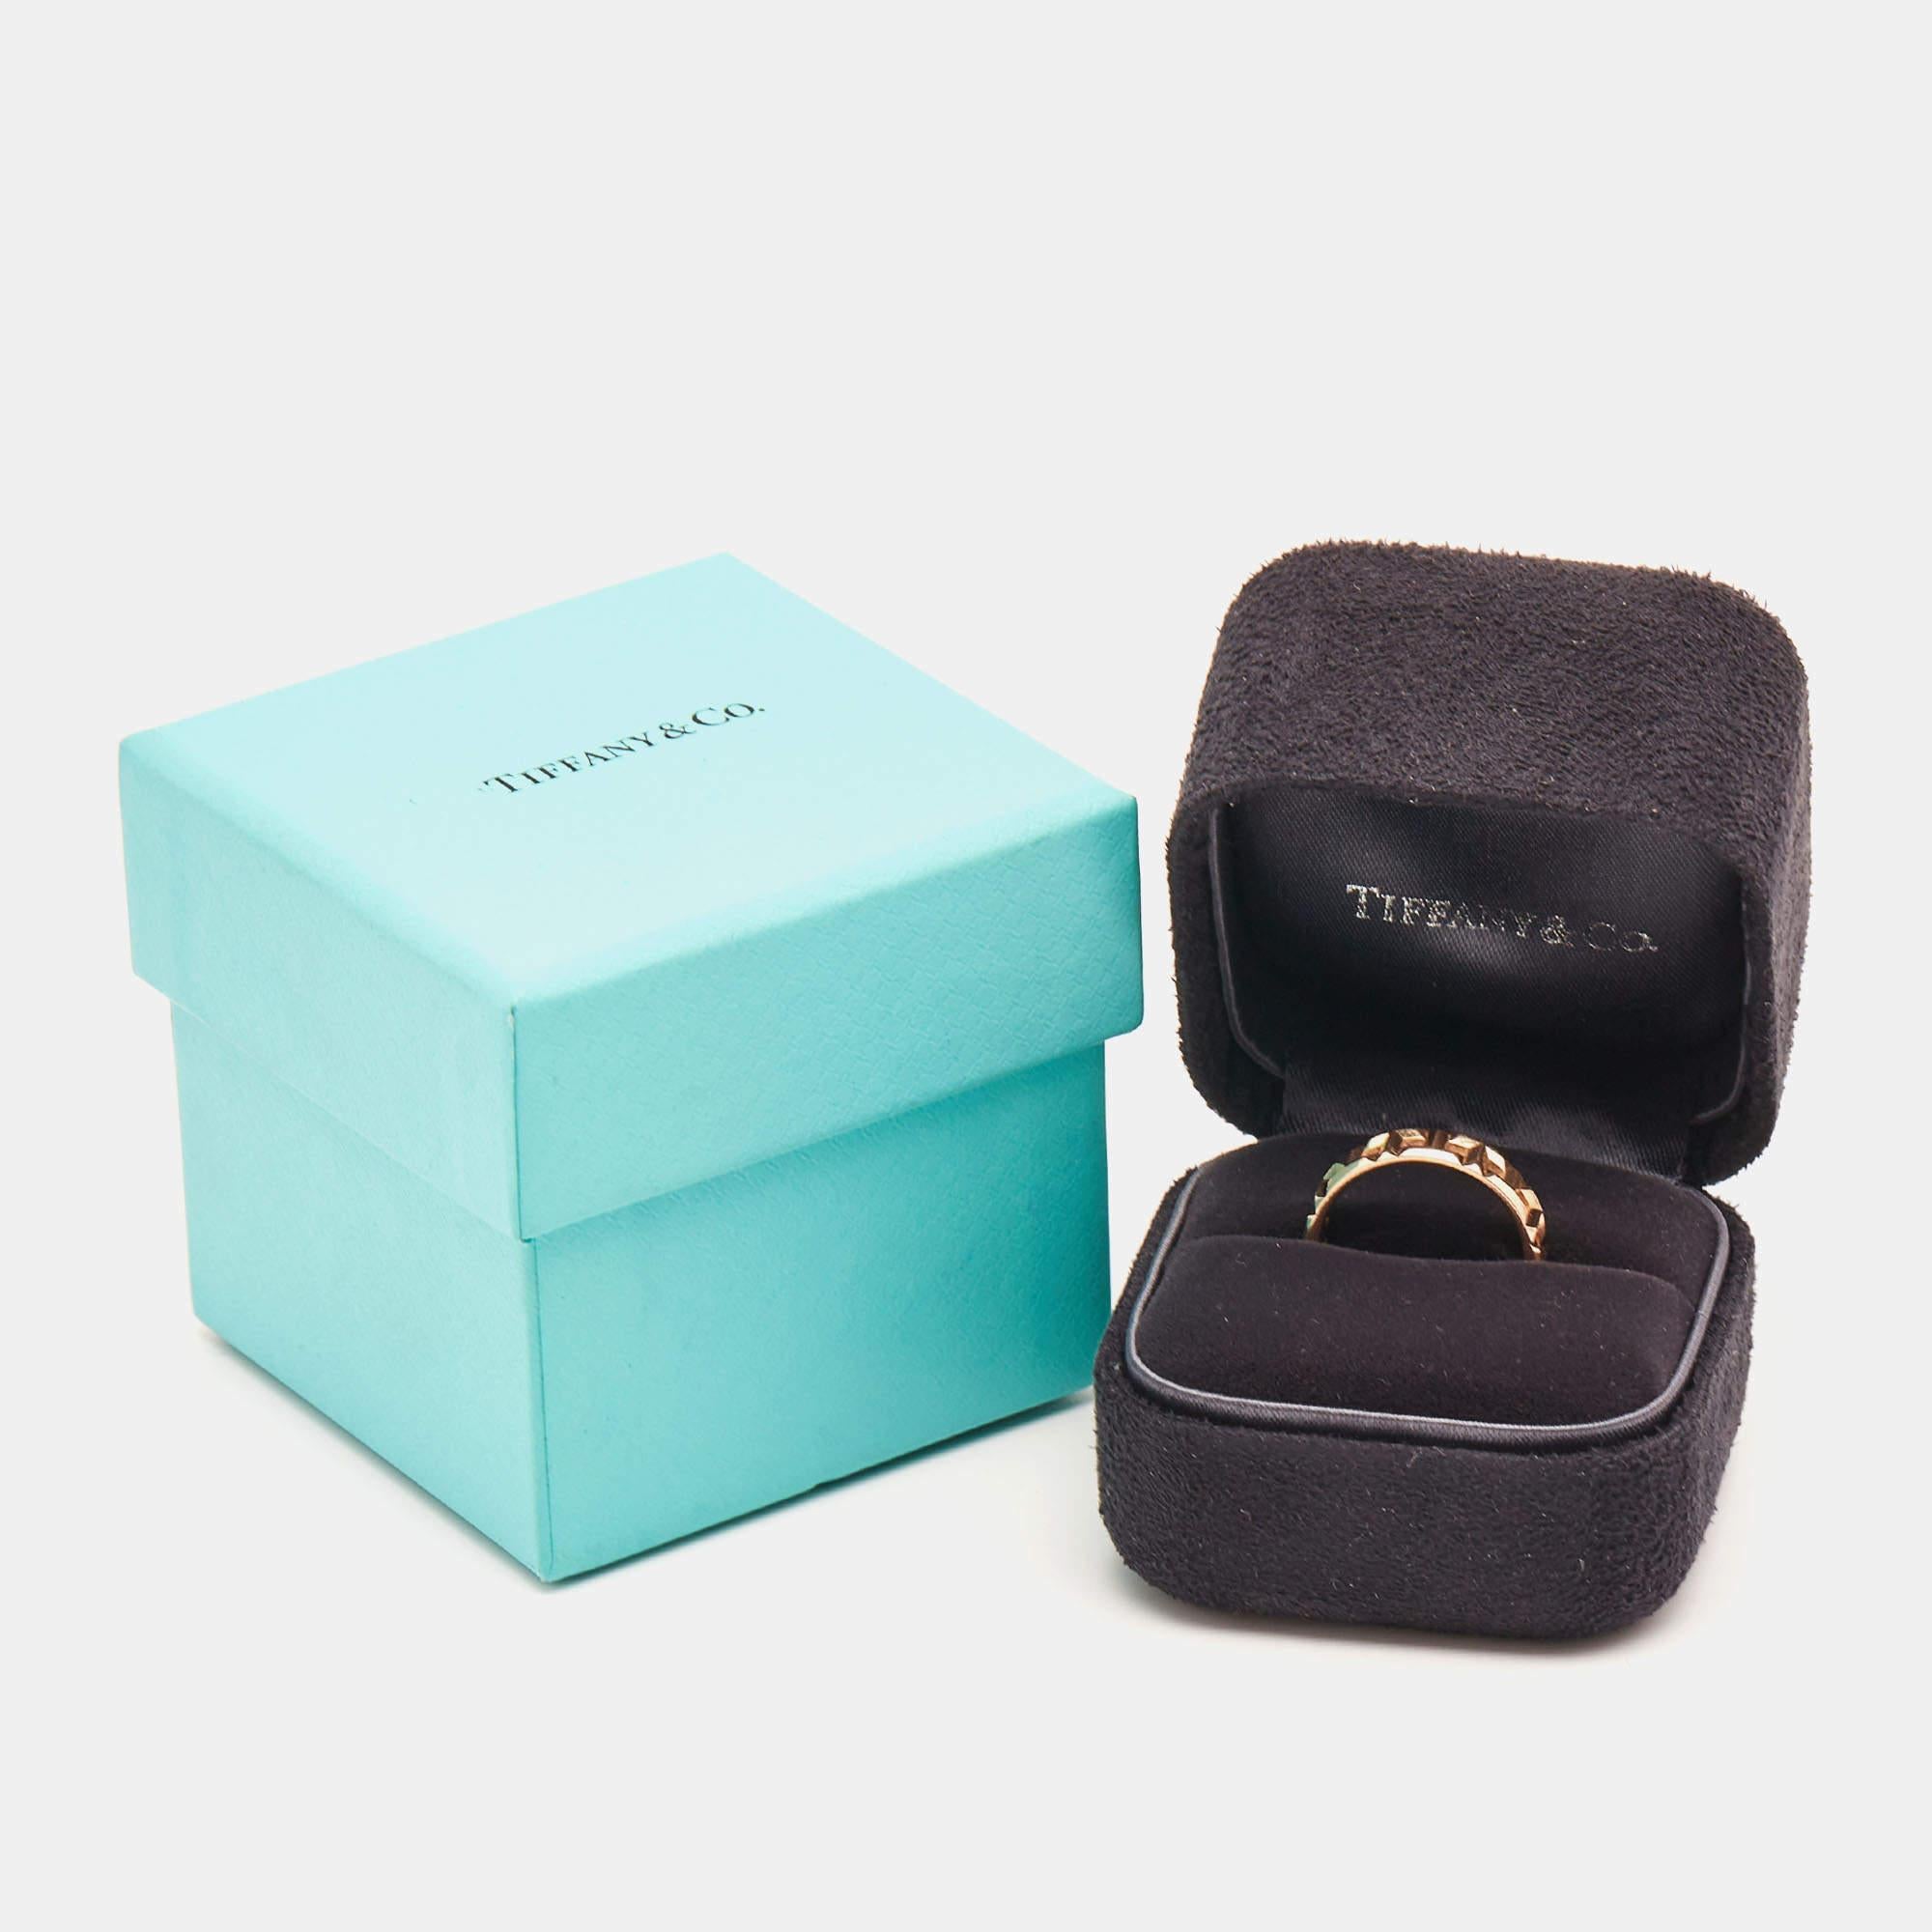 The Tiffany T collection is one of the most popular jewelry lines from Tiffany & Co. Each piece comes with a distinct shape that displays or re-interprets the 'T' symbol. This Tiffany T True wide ring is made of 18k rose gold and the design is